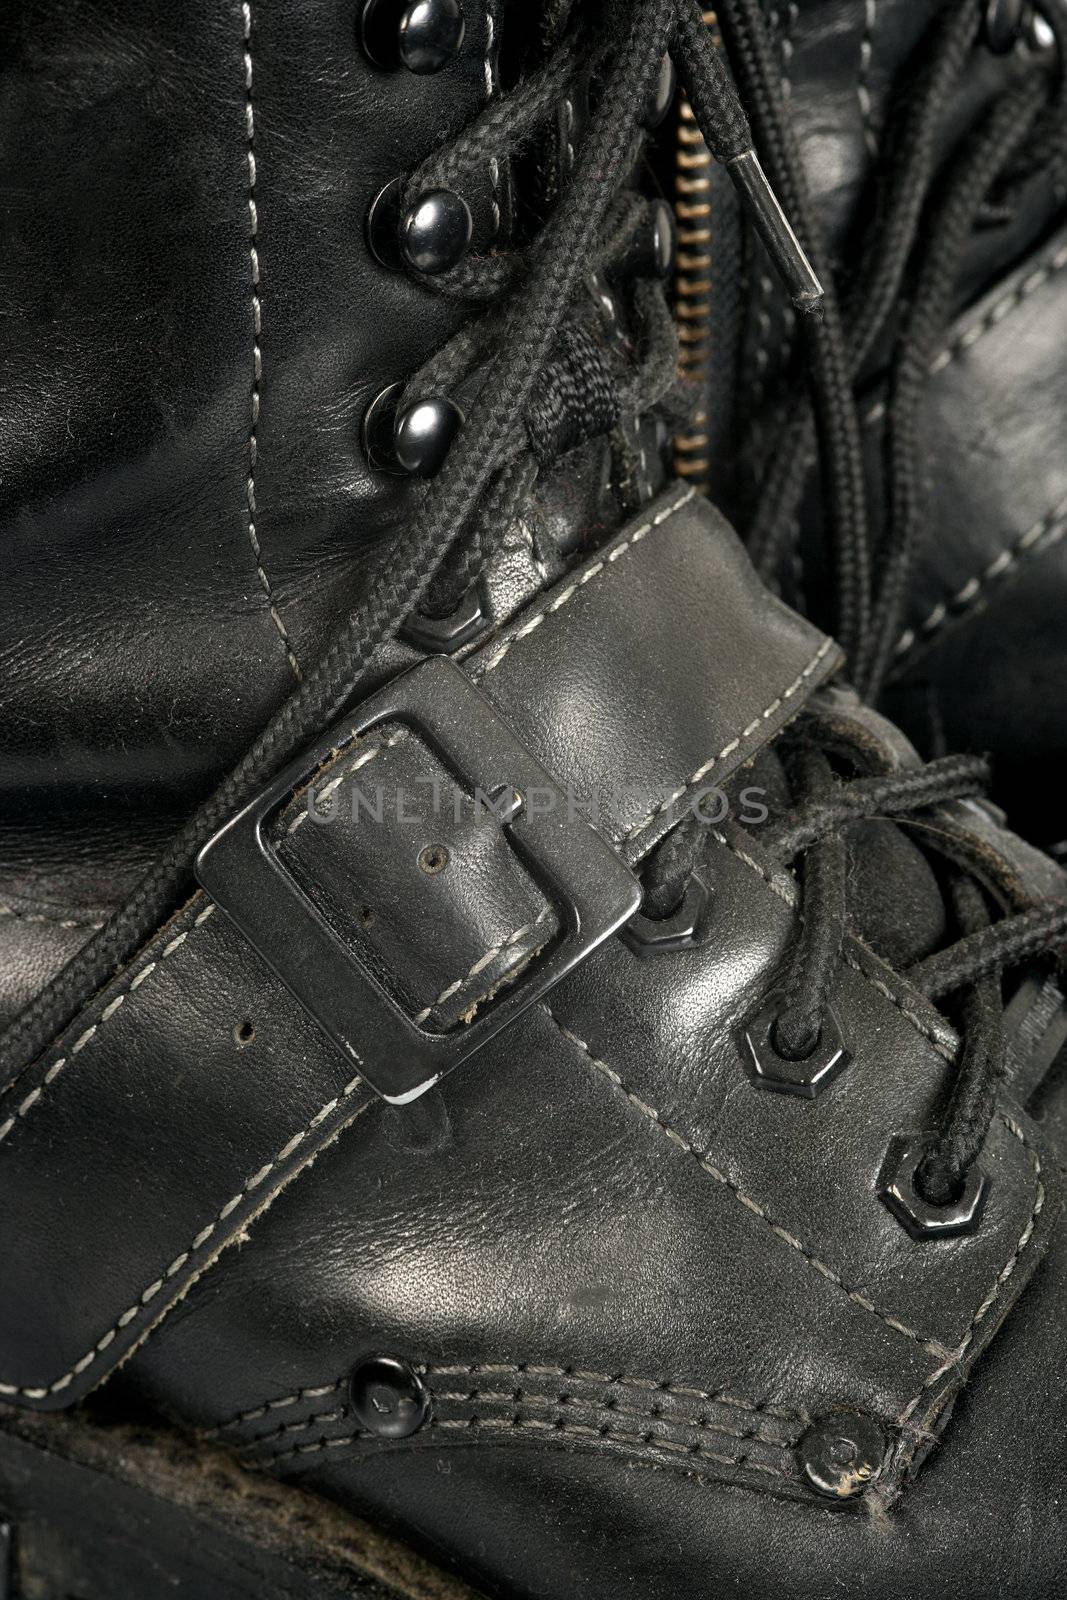 Background image of well worn, dirty, scuffed black boots.
